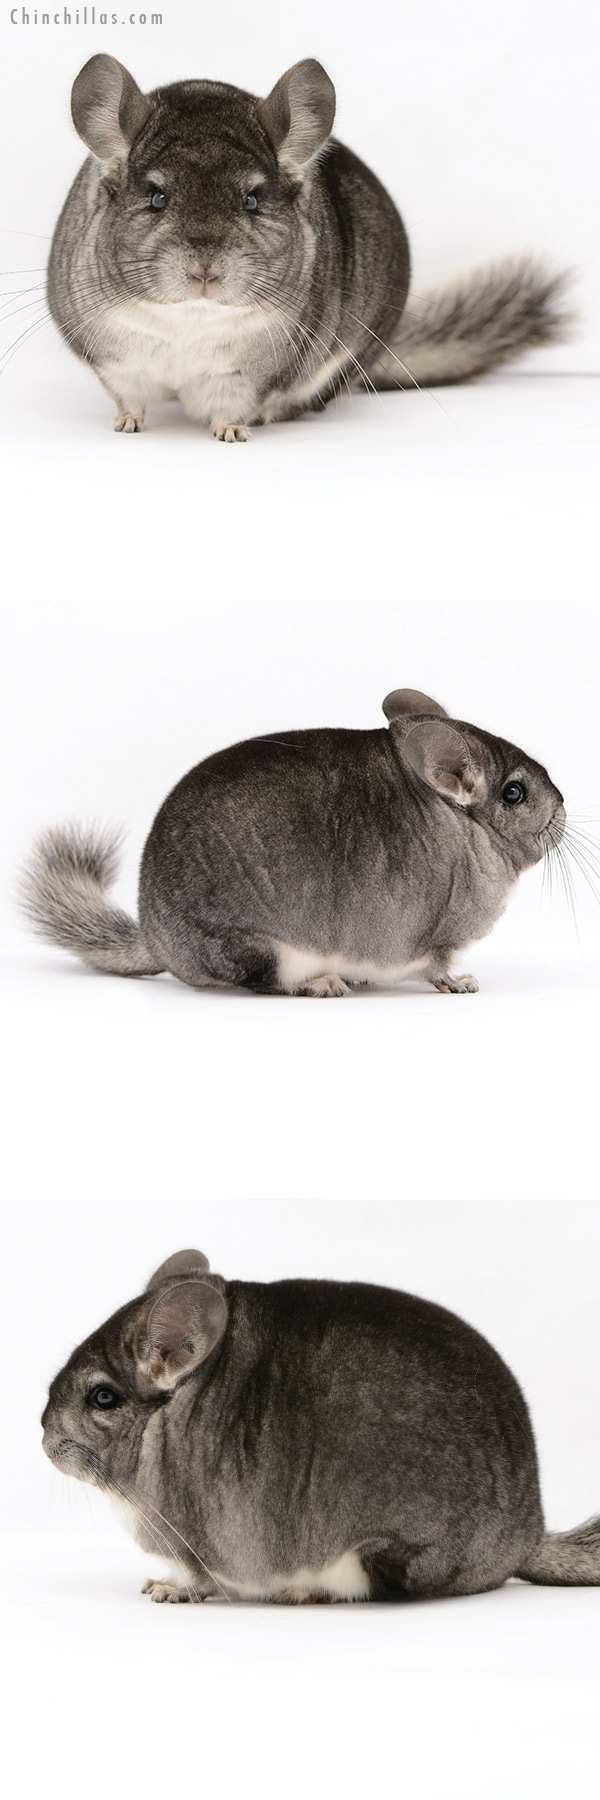 Chinchilla or related item offered for sale or export on Chinchillas.com - 20212 Blocky Premium Production Quality Standard Female Chinchilla